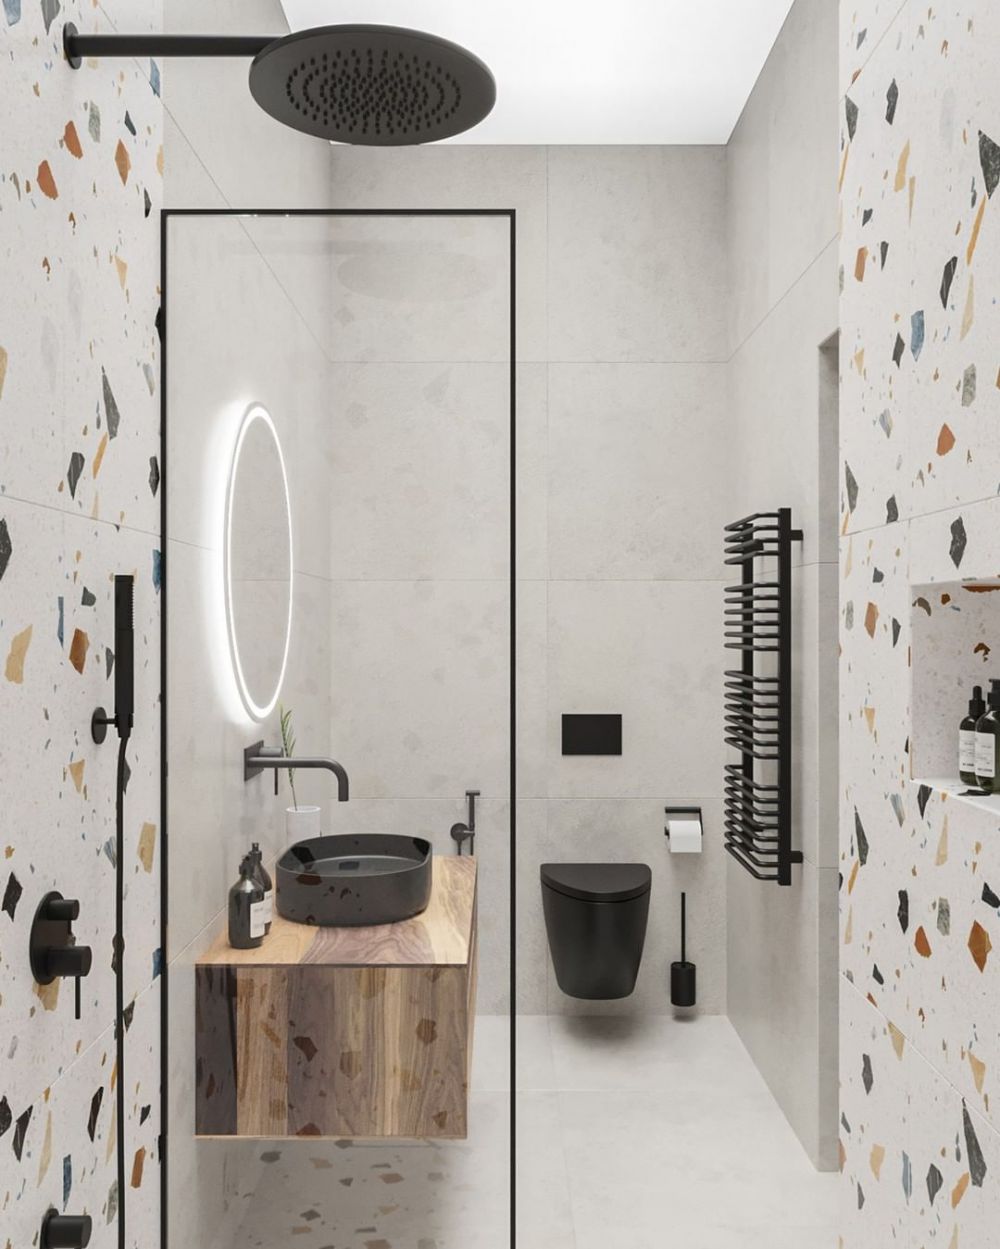 9 Limited Space Bathroom Design Inspirations, Aesthetic!